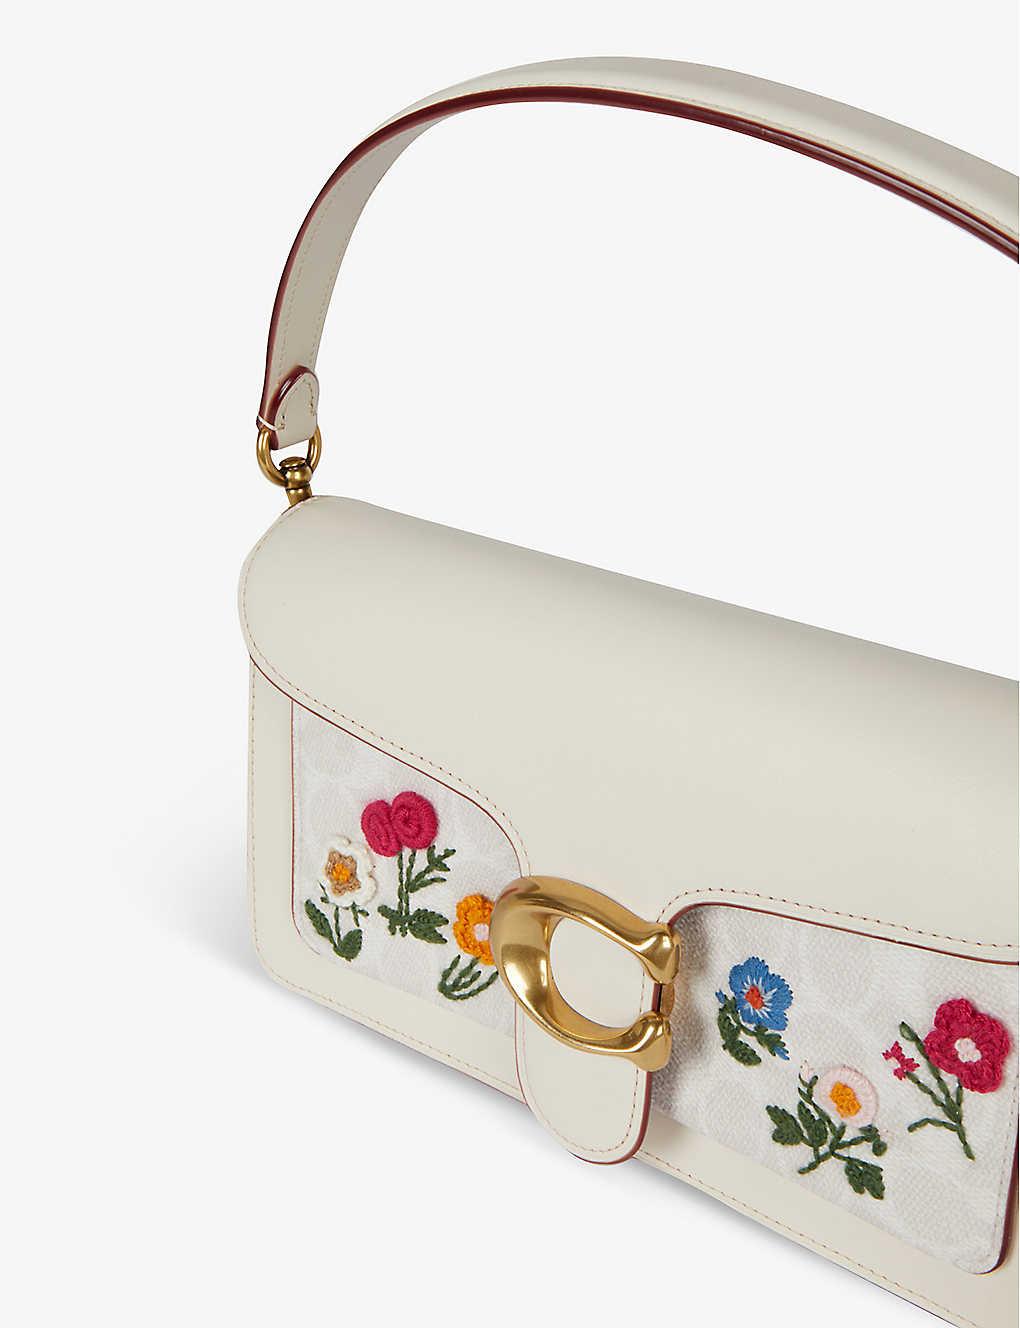 COACH Floral Print Small Wristlet Red Apple Floral Print/Gold One Size :  Amazon.in: Shoes & Handbags